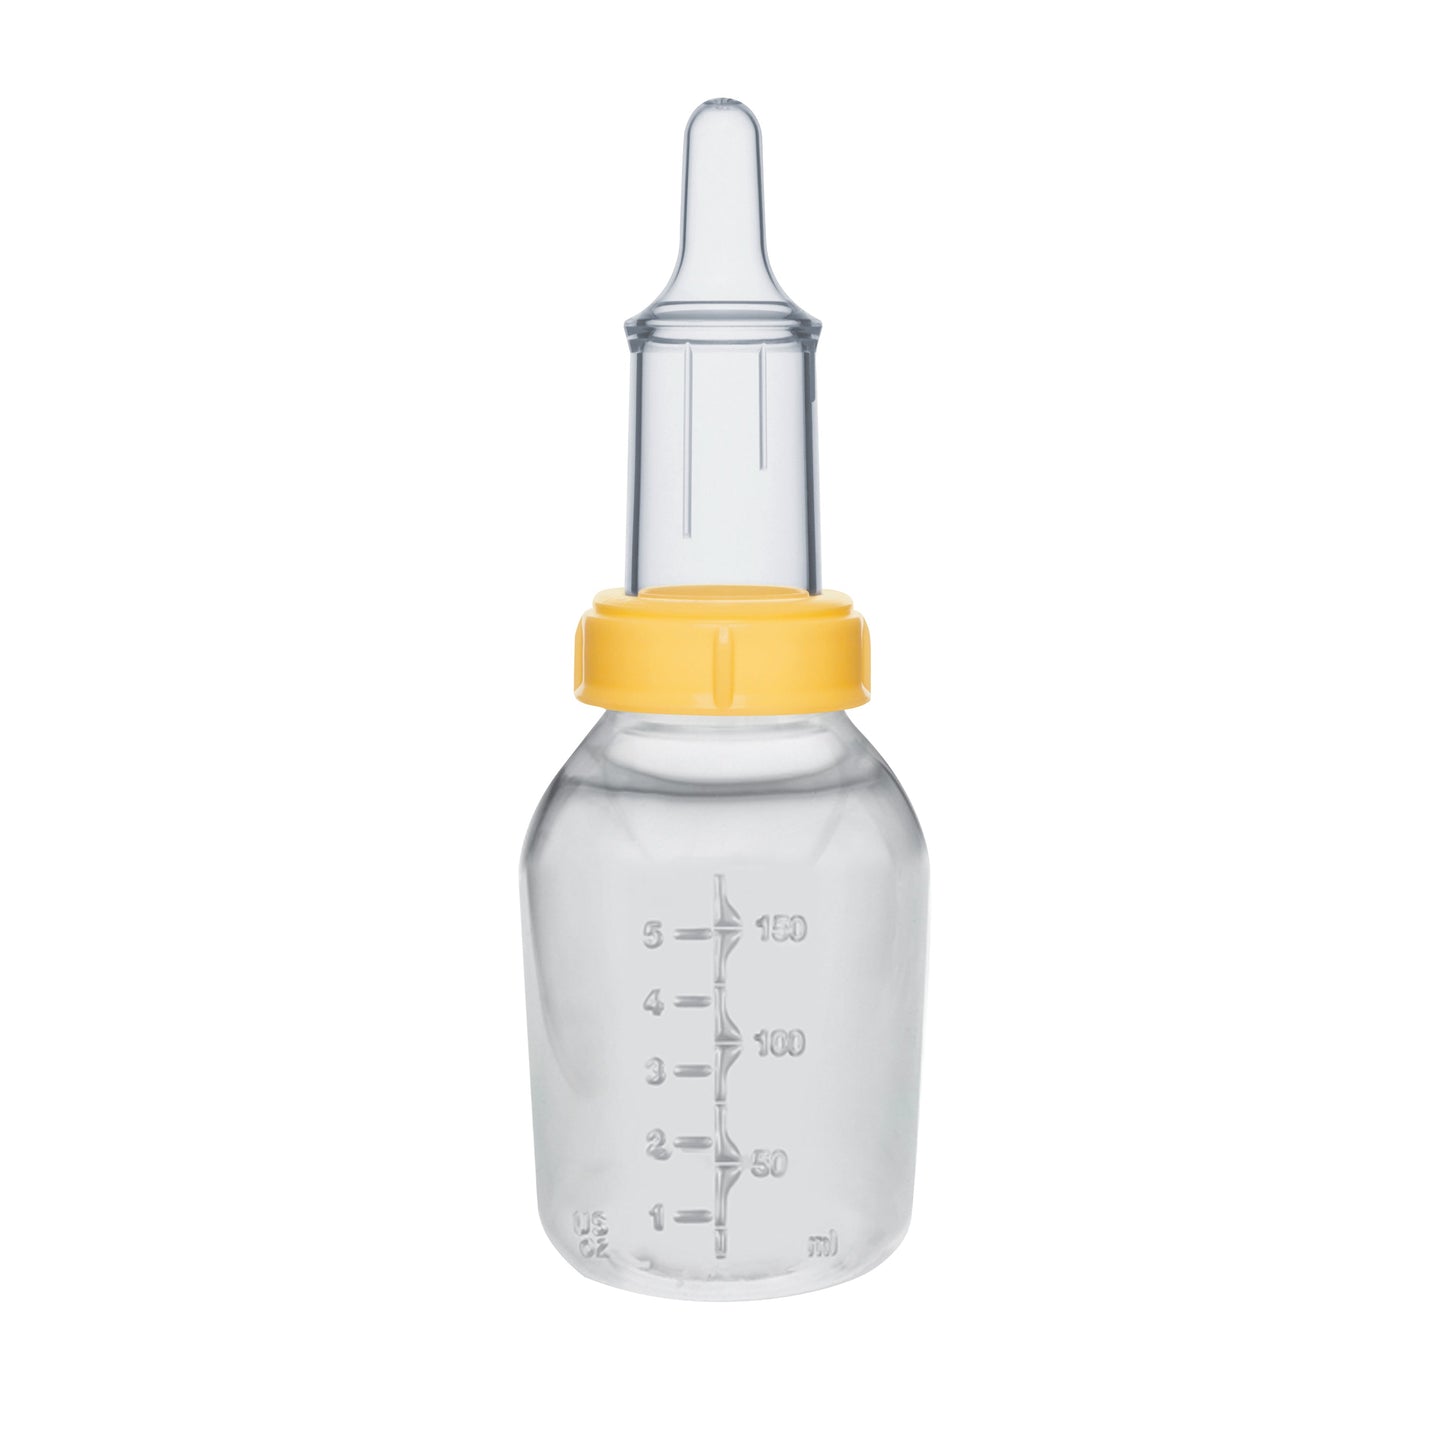 Medela SpecialNeeds Feeder with 150 mL Collection Container, Sterile